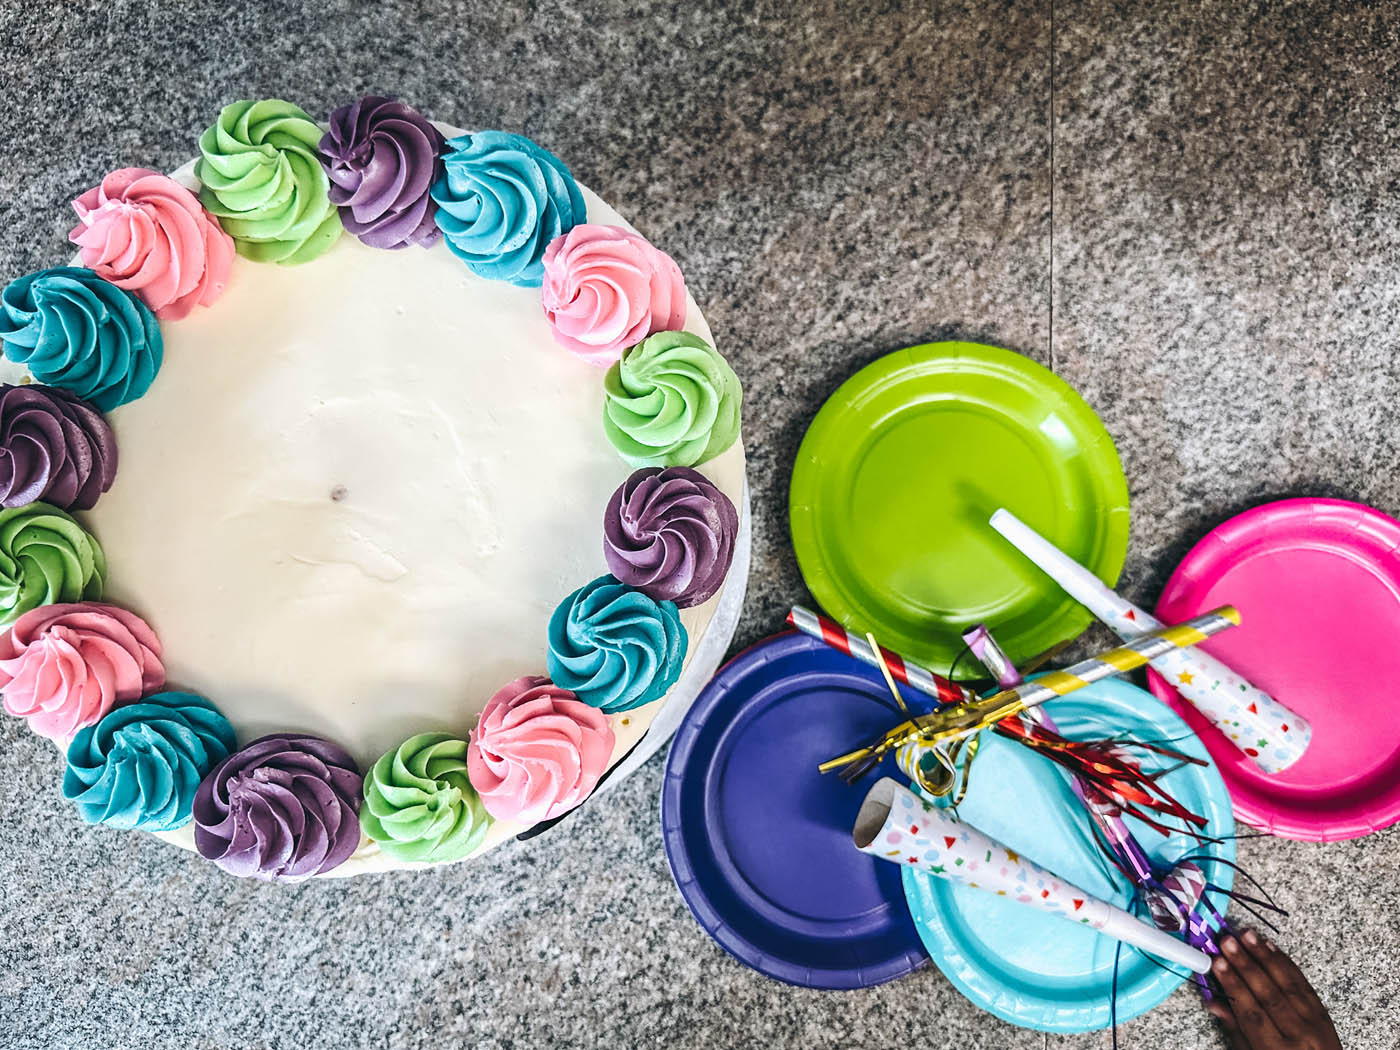 A cake and party supplies - party utensil supplies provided at Romp n' Roll toddler birthday venues in Willow Grove, PA.